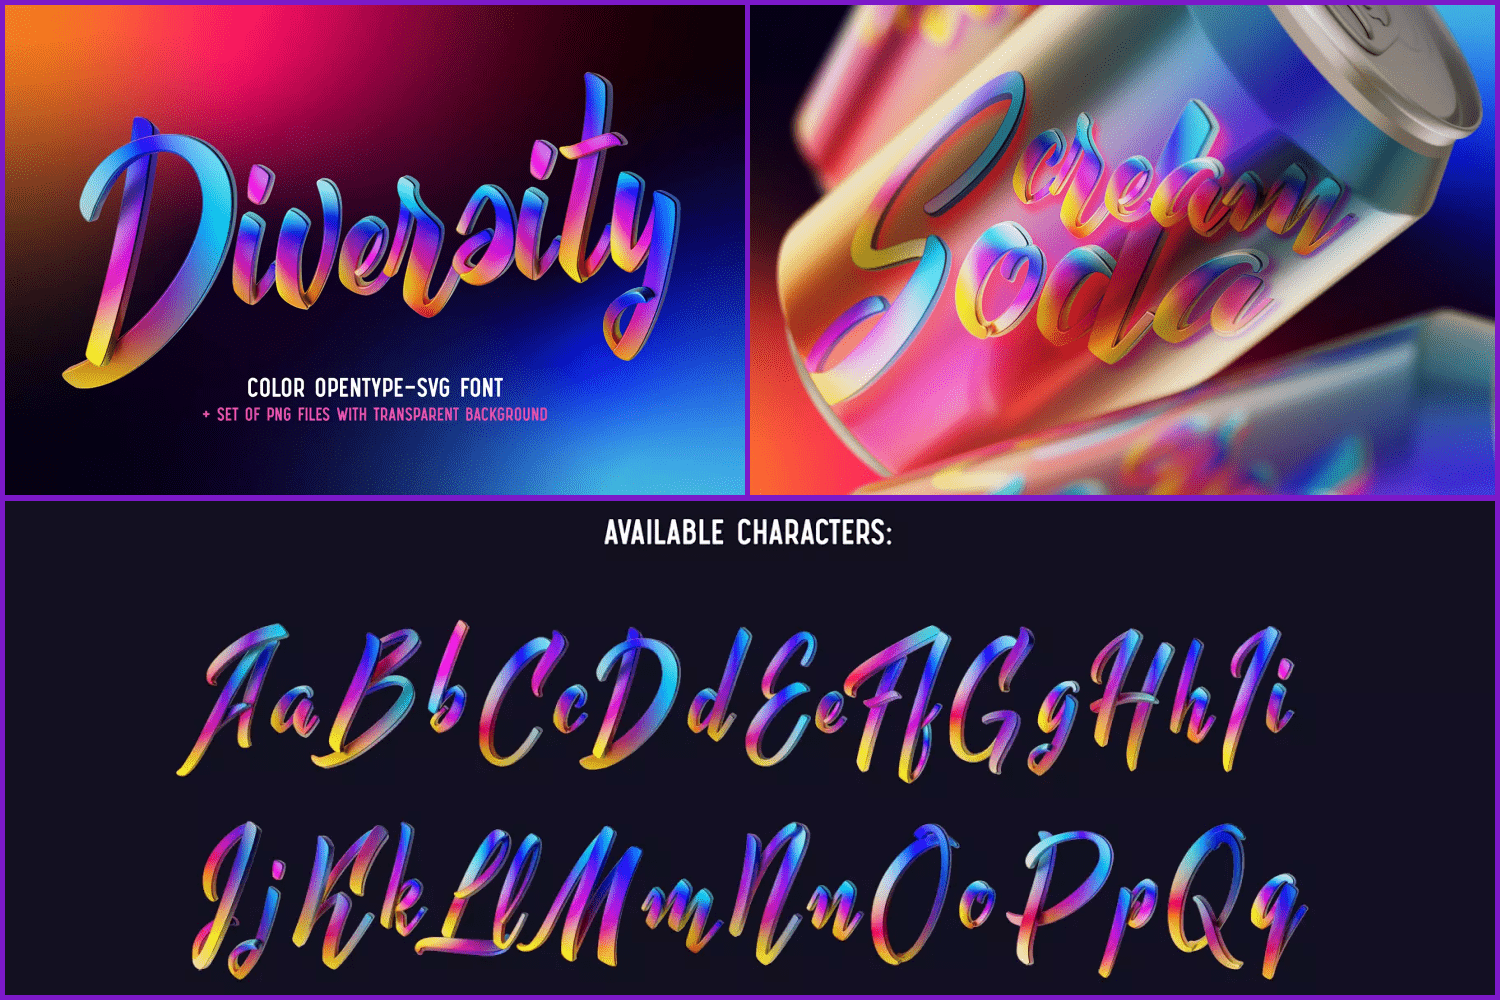 Examples of using a font with multi-colored letters.